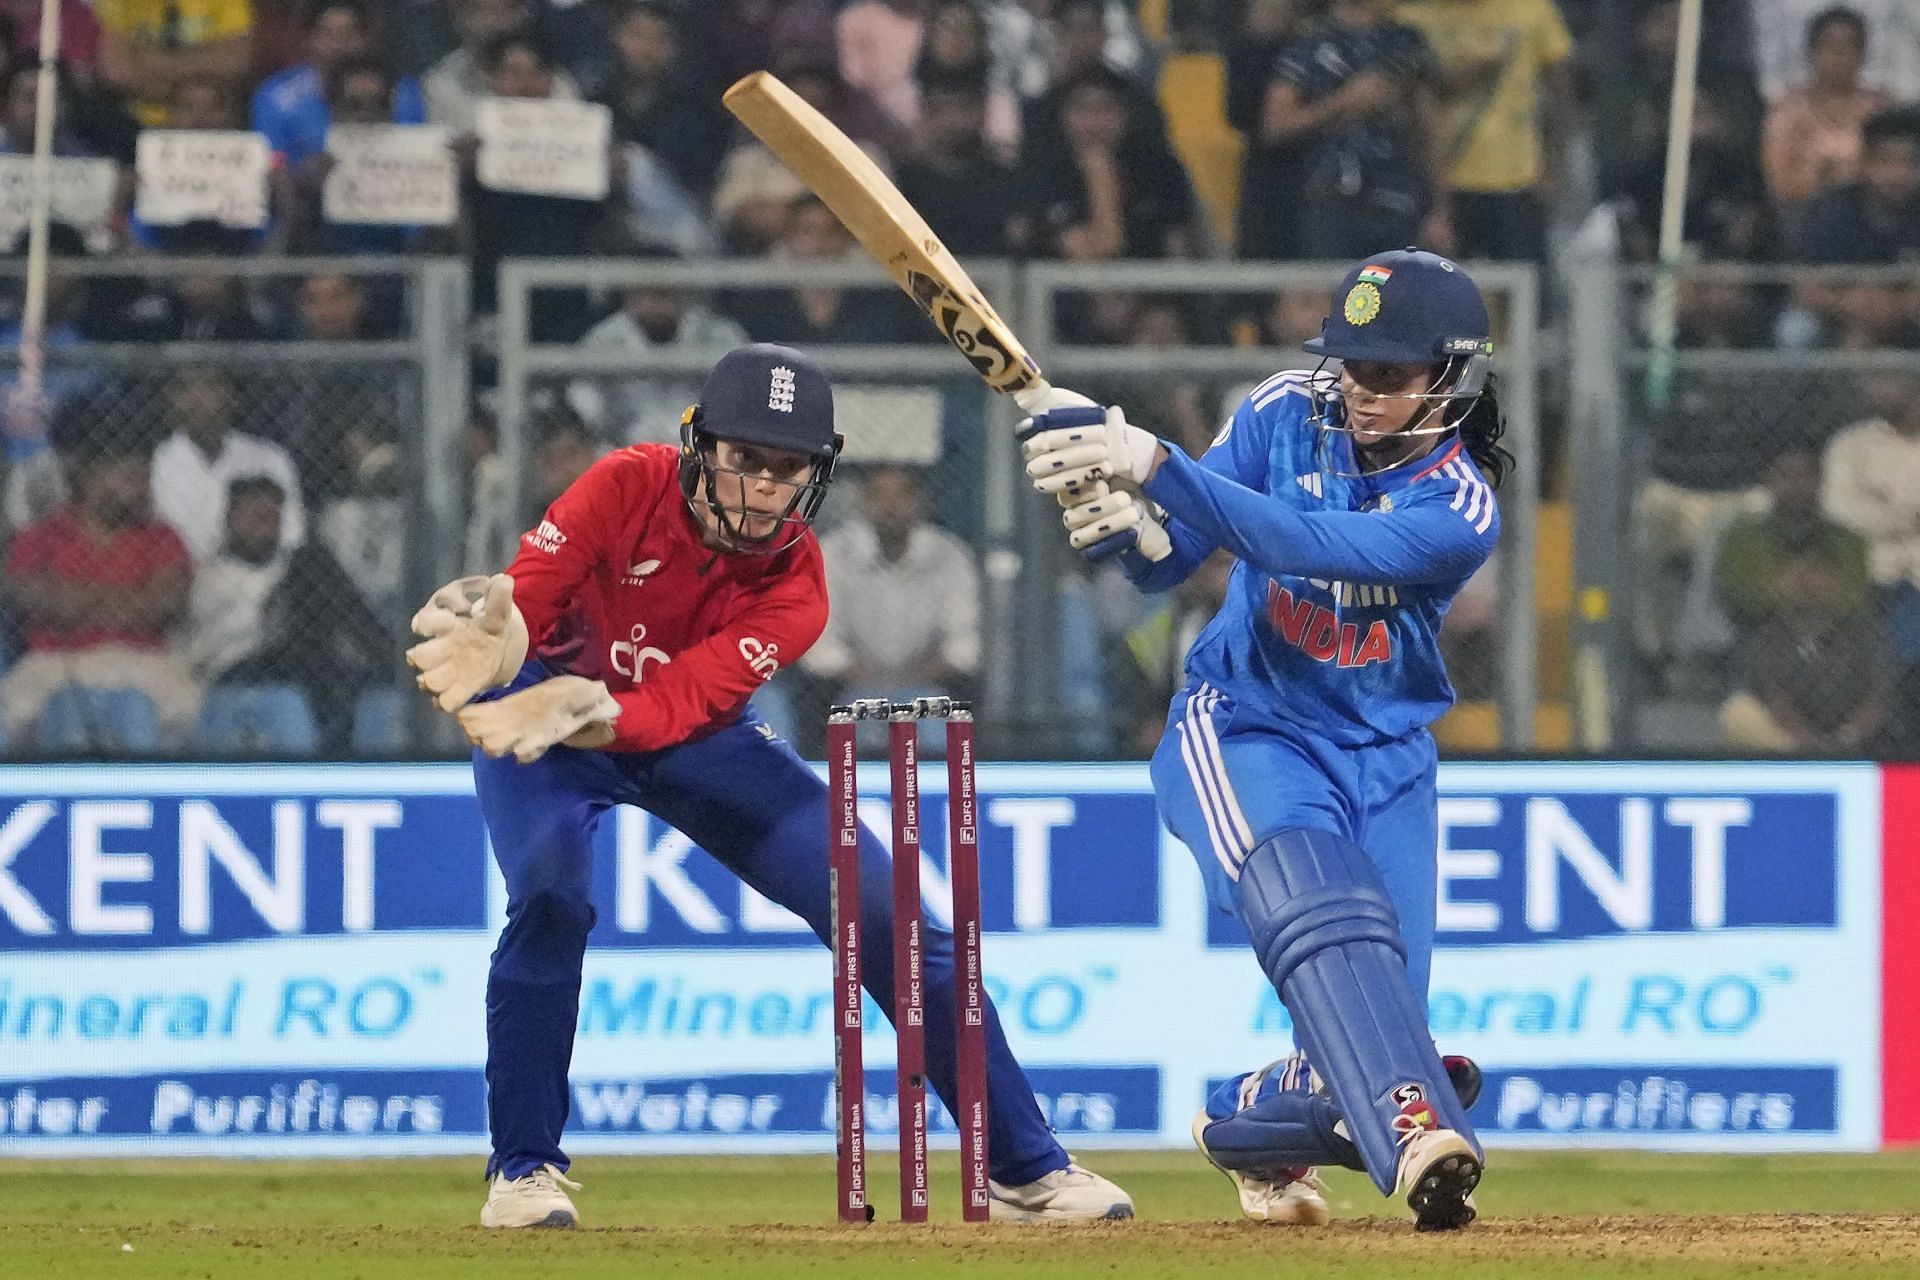 Smriti Mandhana fell cheaply in the first two matches